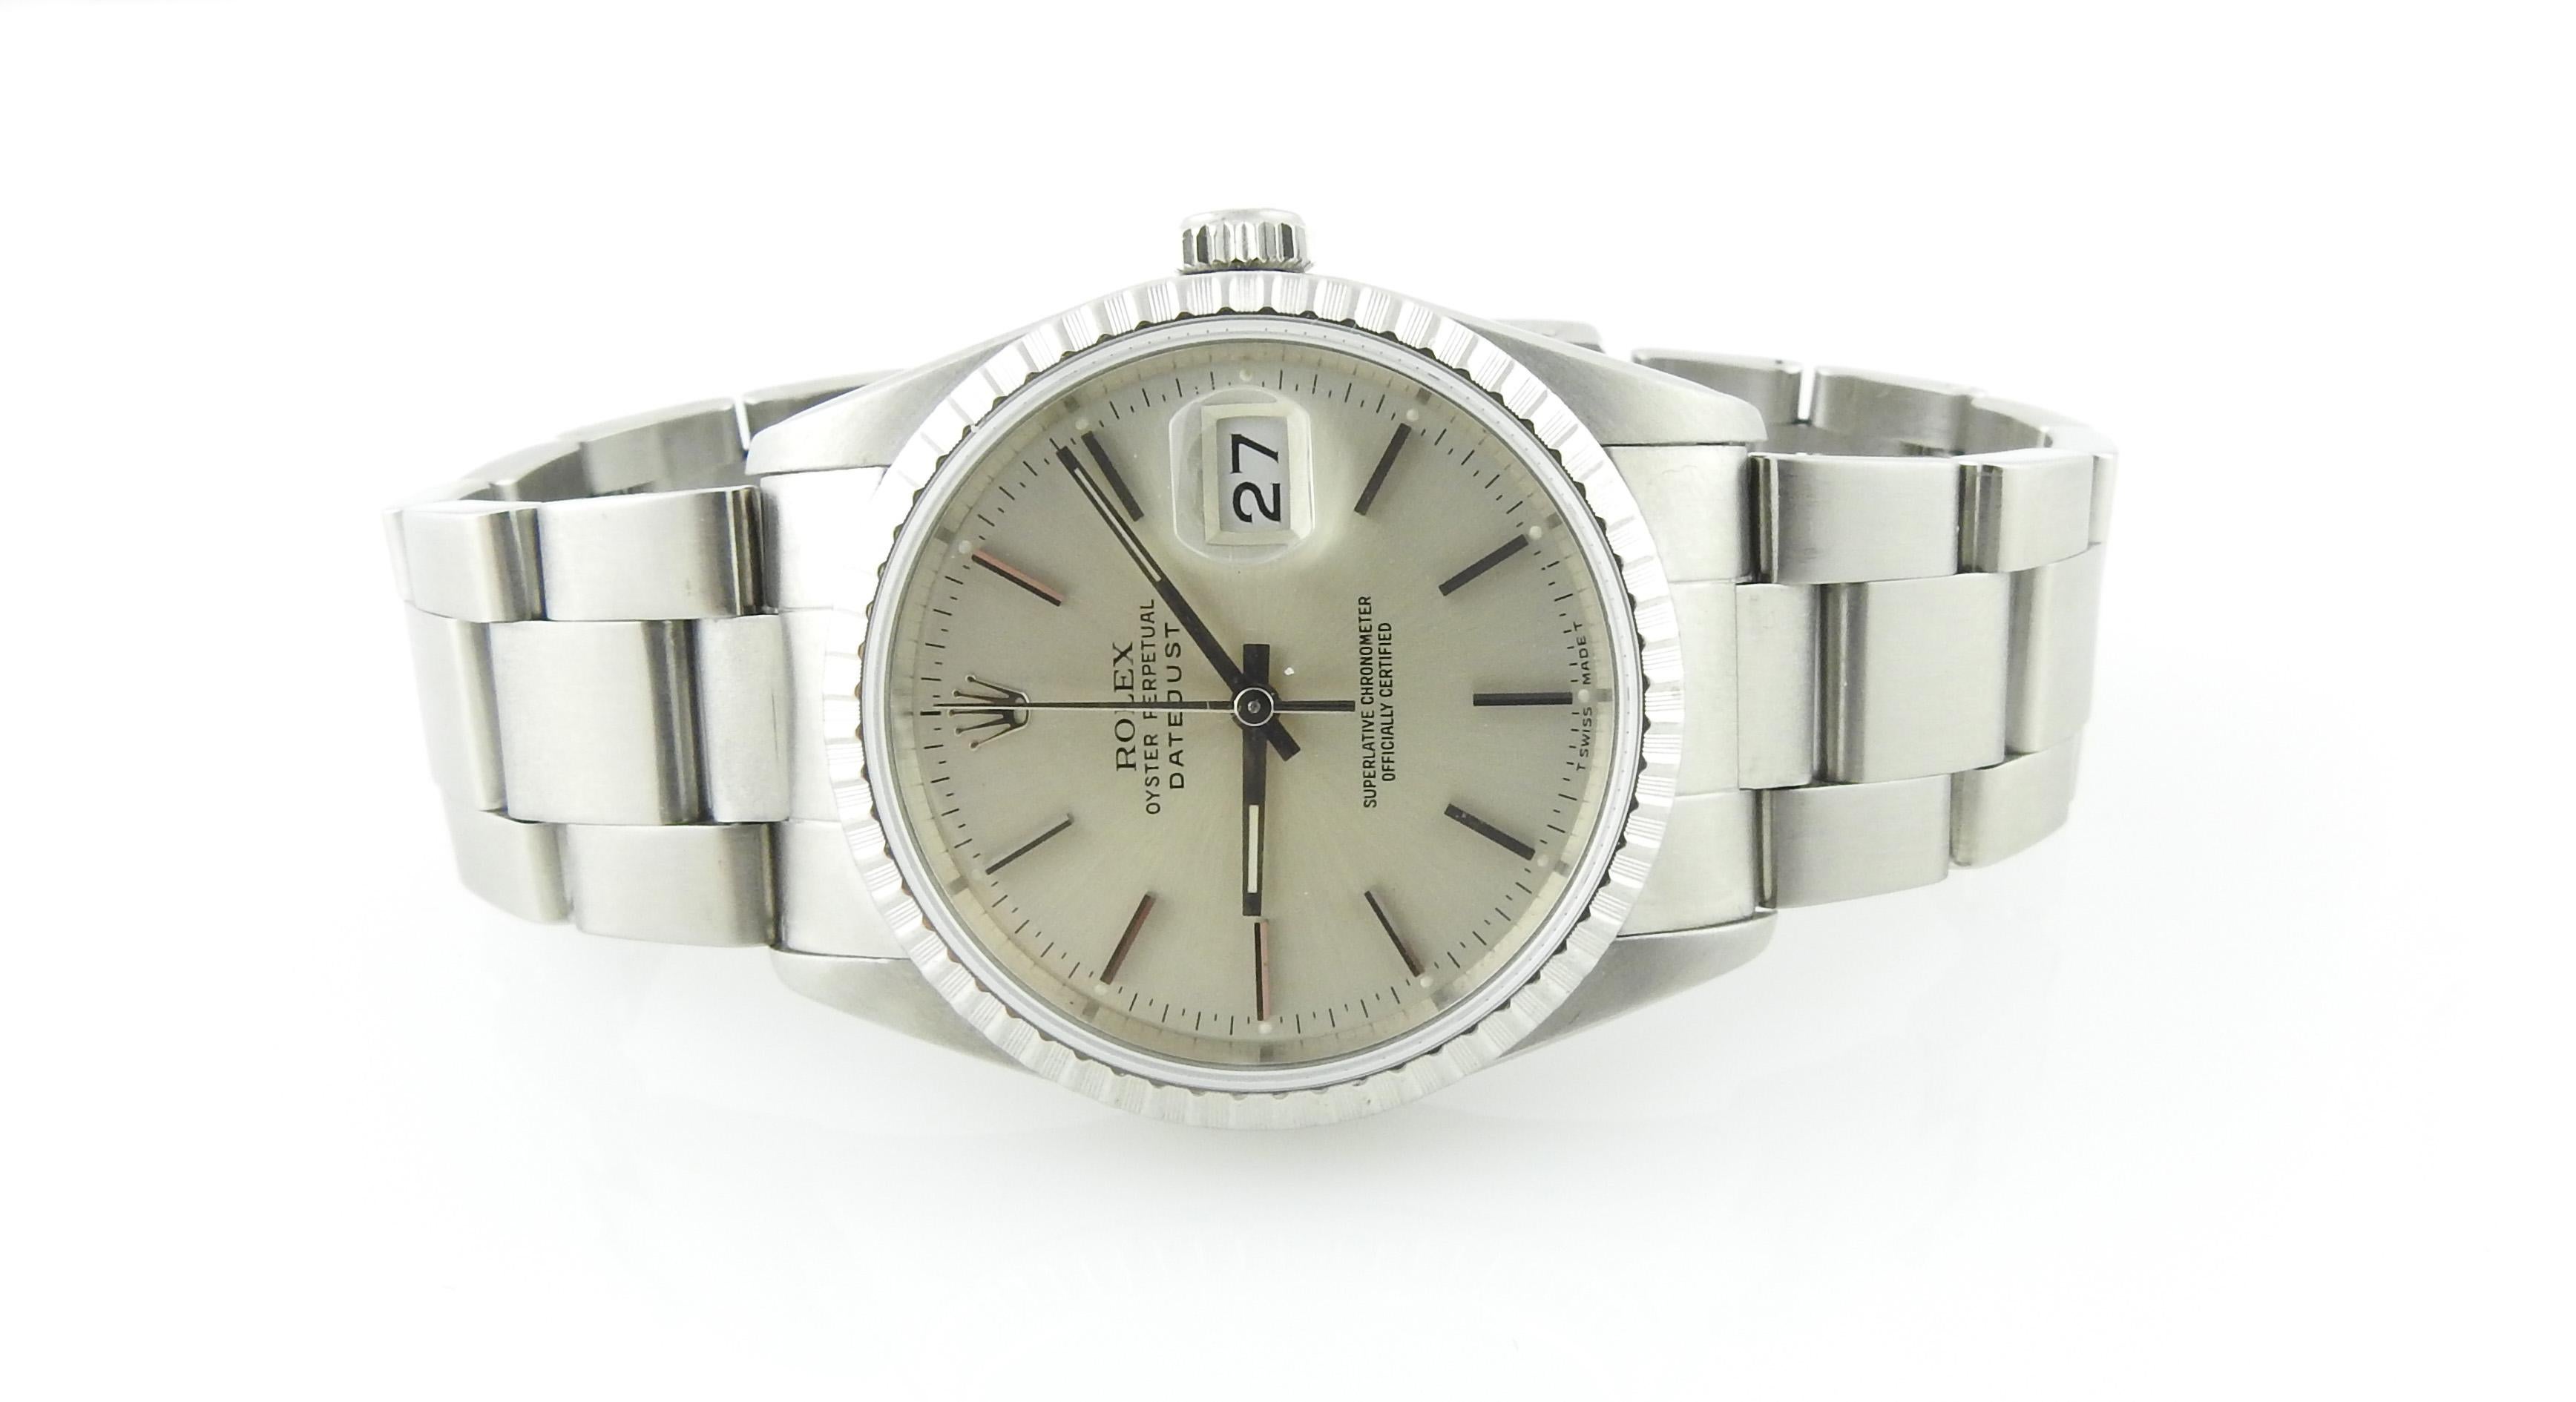 1991 Rolex Men's Datejust Watch

Model: 16220
Serial: X151839

Automatic Movement

Silver Dial with silver stick markers

Stainless engine turned bezel

36mm case

Oyster bracelet has very minimal stretch and fits up to 7 3/4